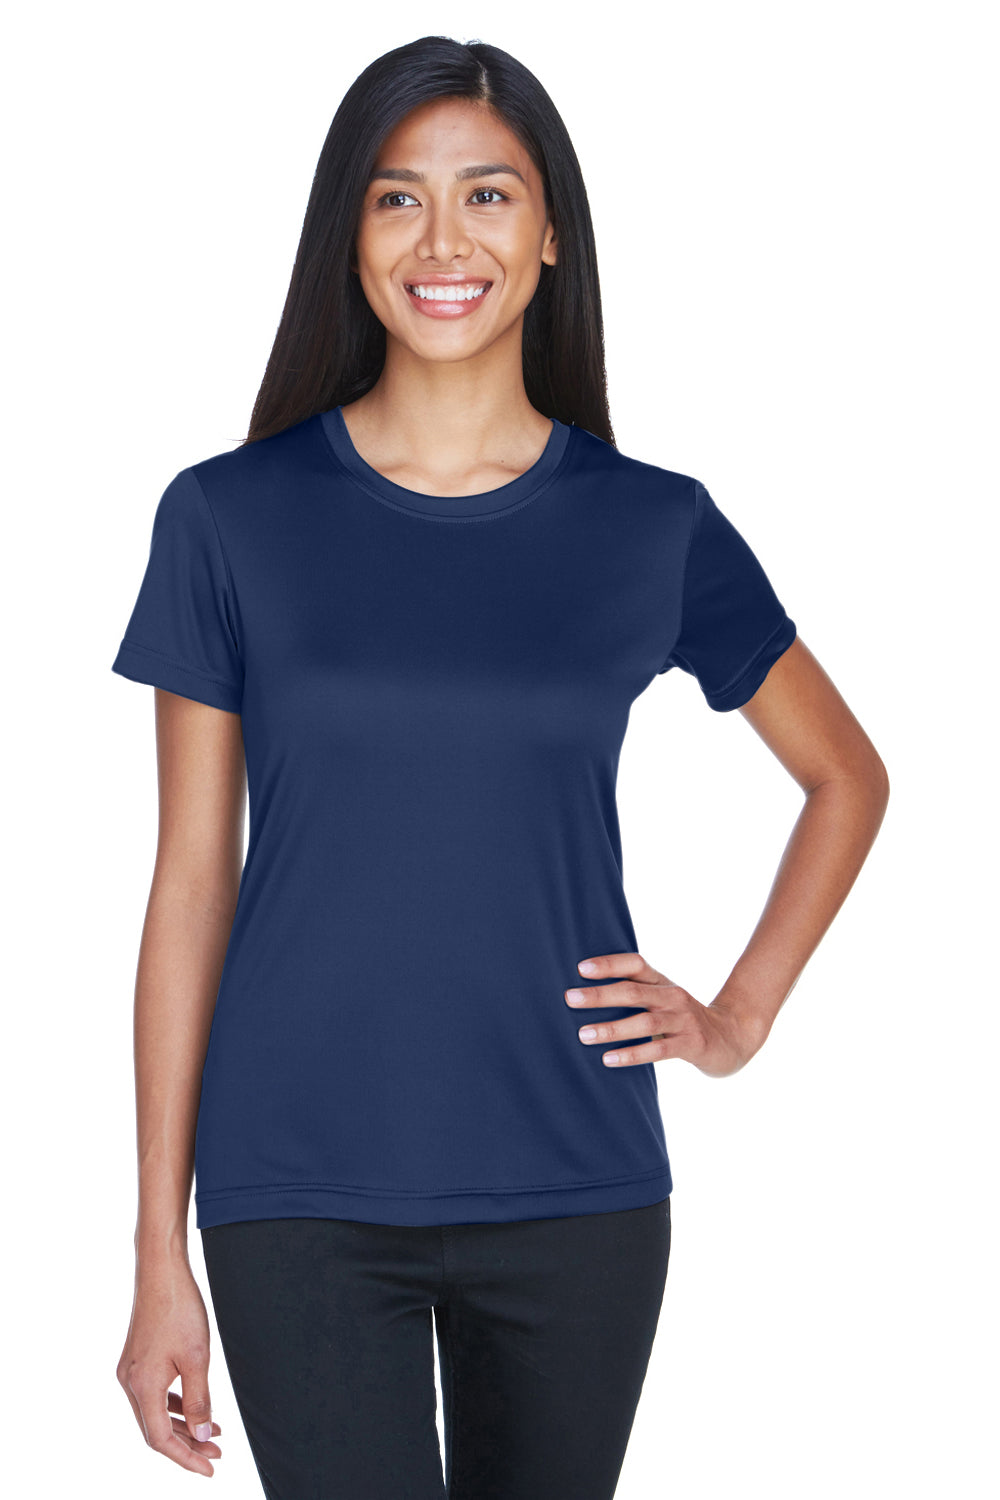 UltraClub 8620L Womens Cool & Dry Performance Moisture Wicking Short Sleeve Crewneck T-Shirt Navy Blue Front